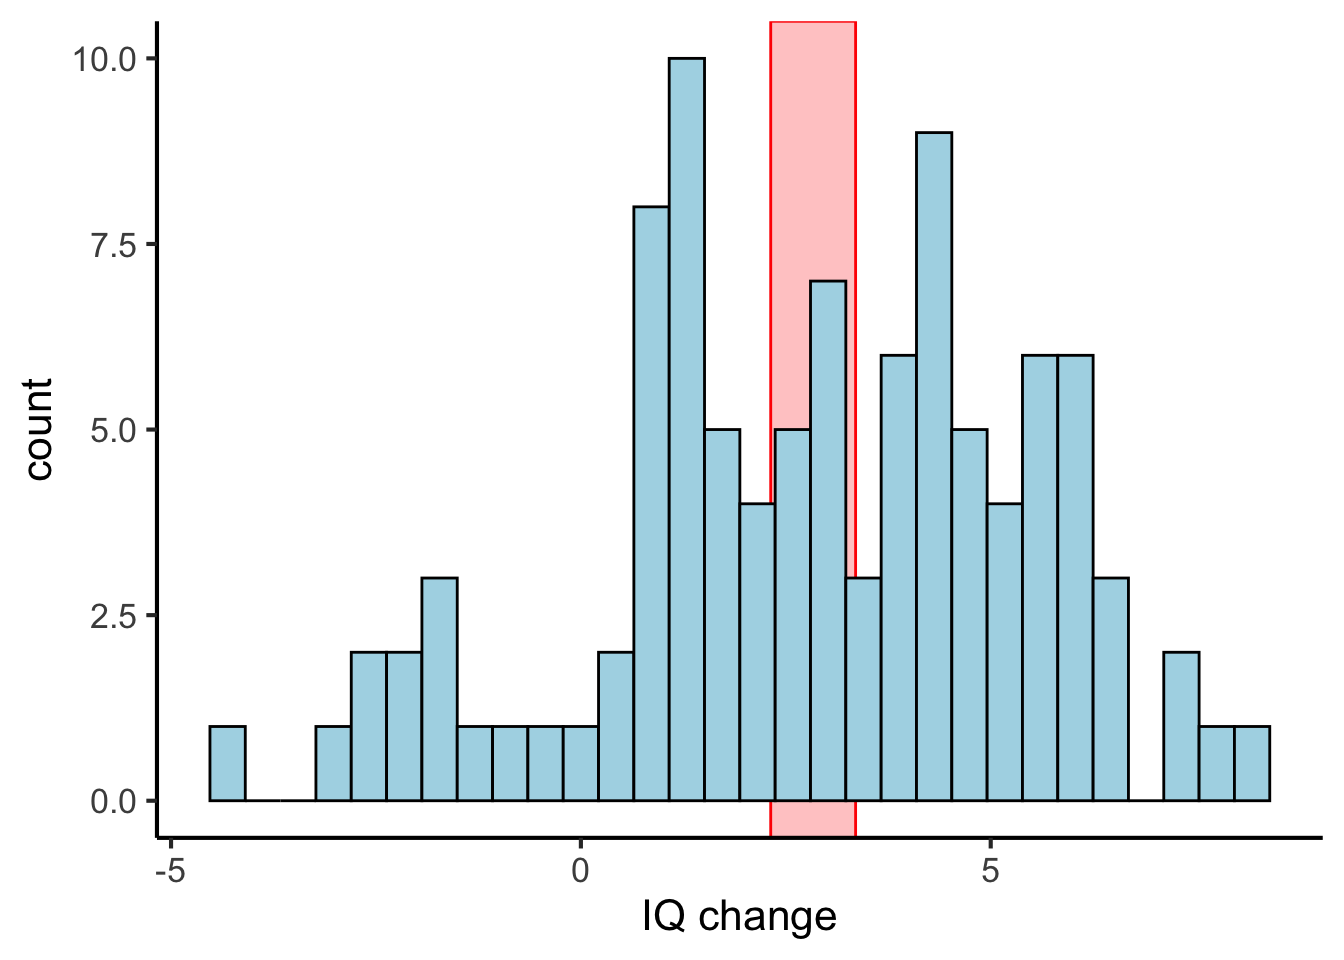 The same fictional dataset, but plotting changes in IQ scores. The red rectangle denotes the 95% confidence interval of the mean.